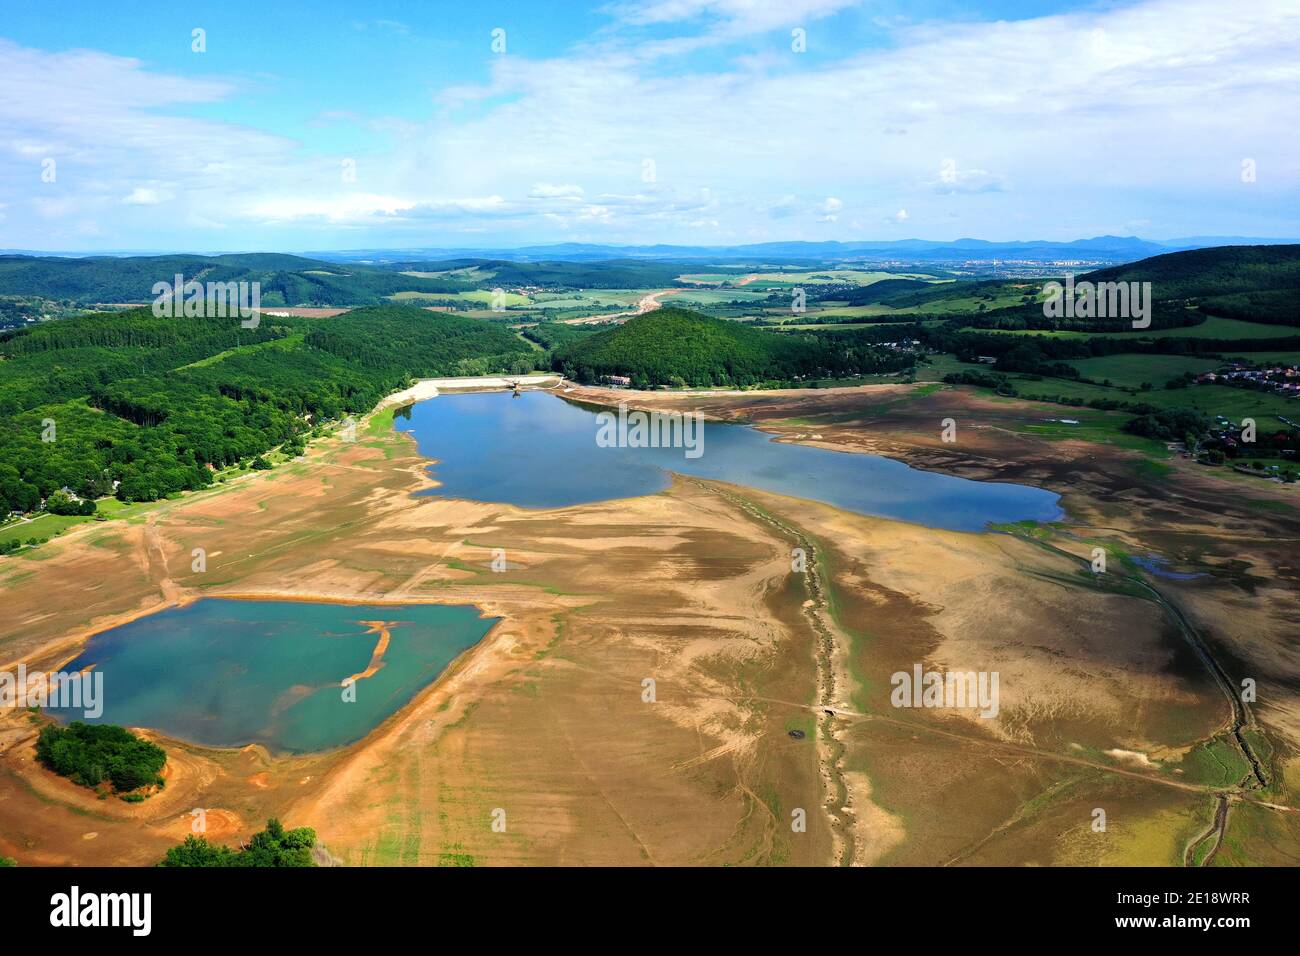 Aerial view of the Ruzina reservoir in Slovakia Stock Photo - Alamy